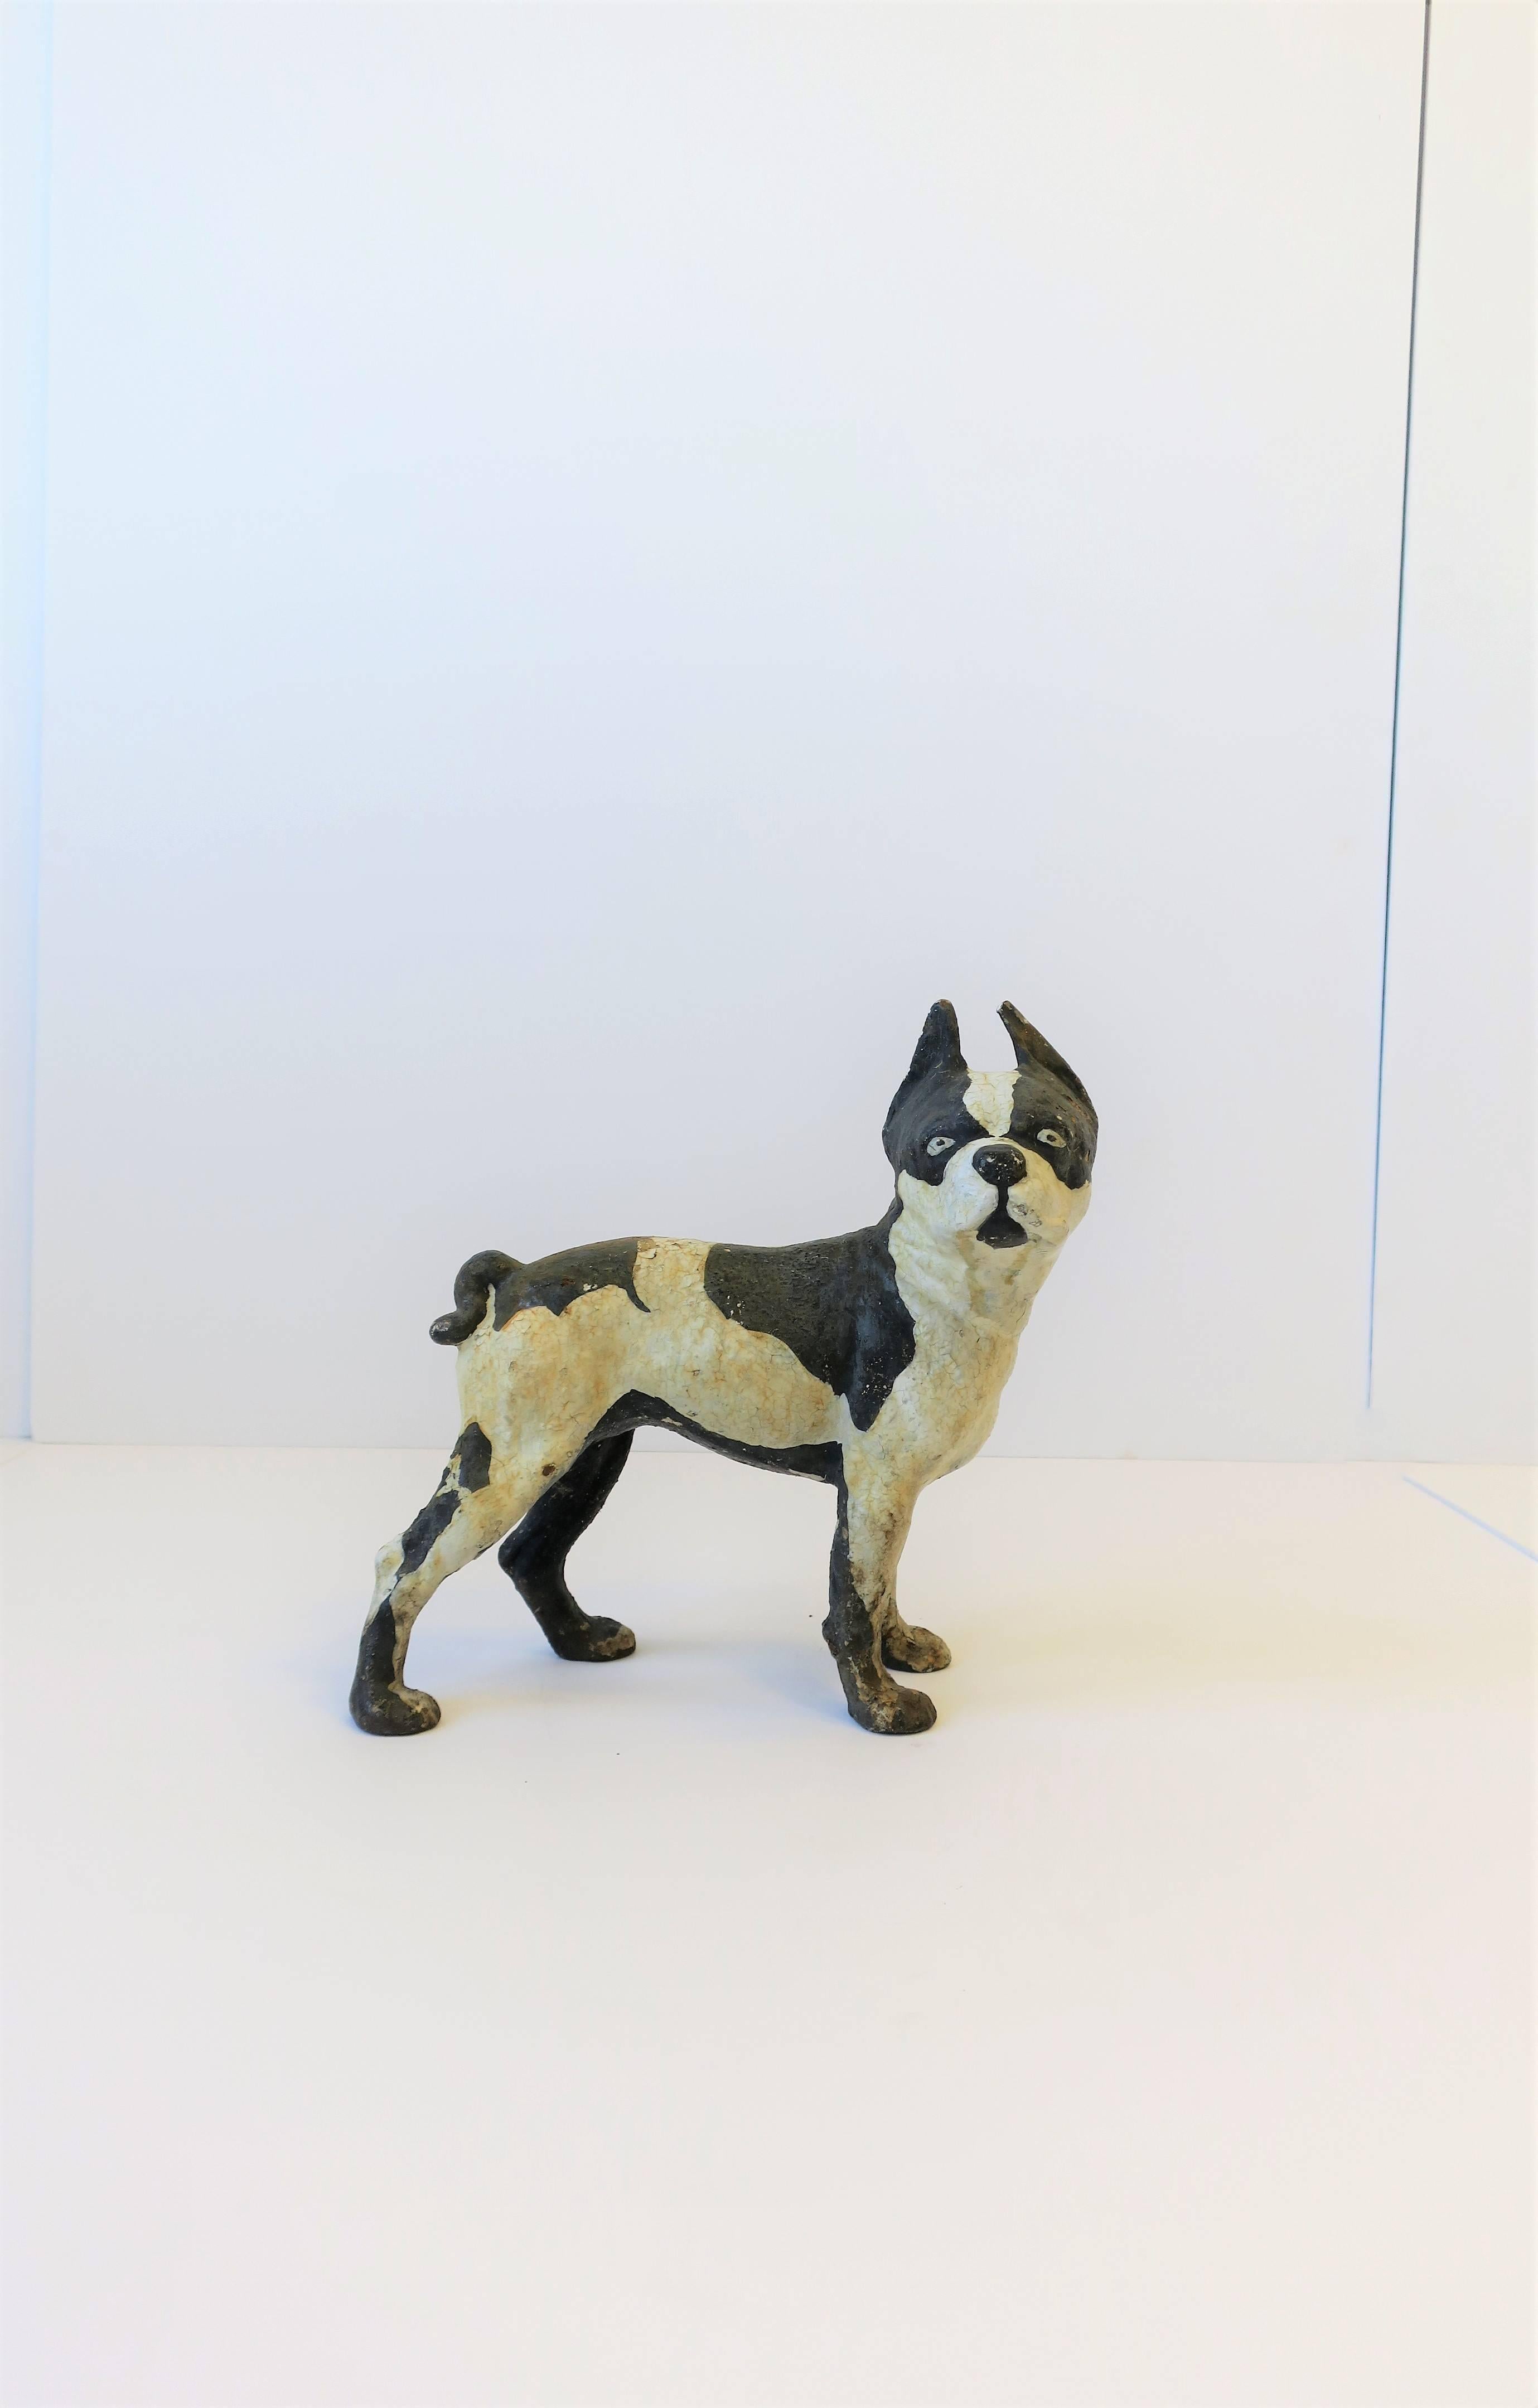 A substantial vintage black and white cast iron Boston Terrier dog sculpture or doorstop, circa 1930s. 

Measurements include: 4.75